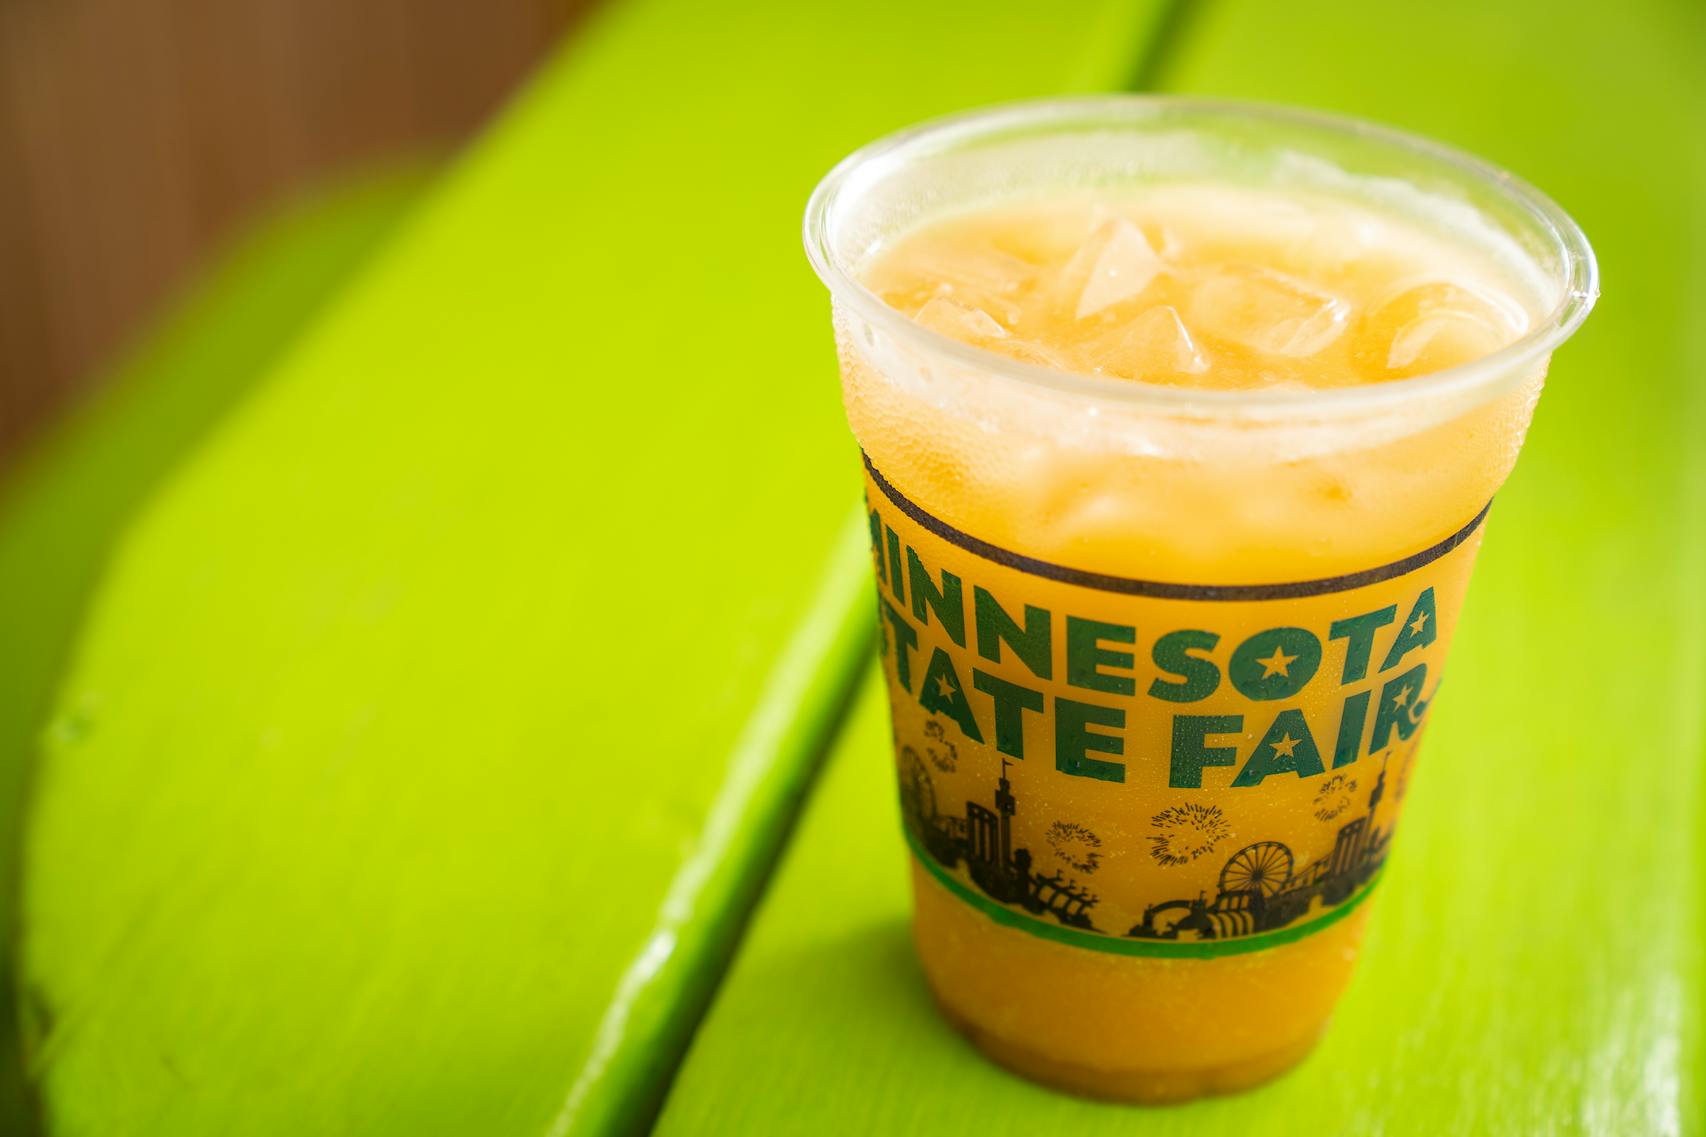 Five-Spiced Thai Tea from Union Hmong Kitchen. The new foods of the 2023 Minnesota State Fair photographed on the first day of the fair in Falcon Heights, Minn. on Tuesday, Aug. 8, 2023. ] LEILA NAVIDI • leila.navidi@startribune.com